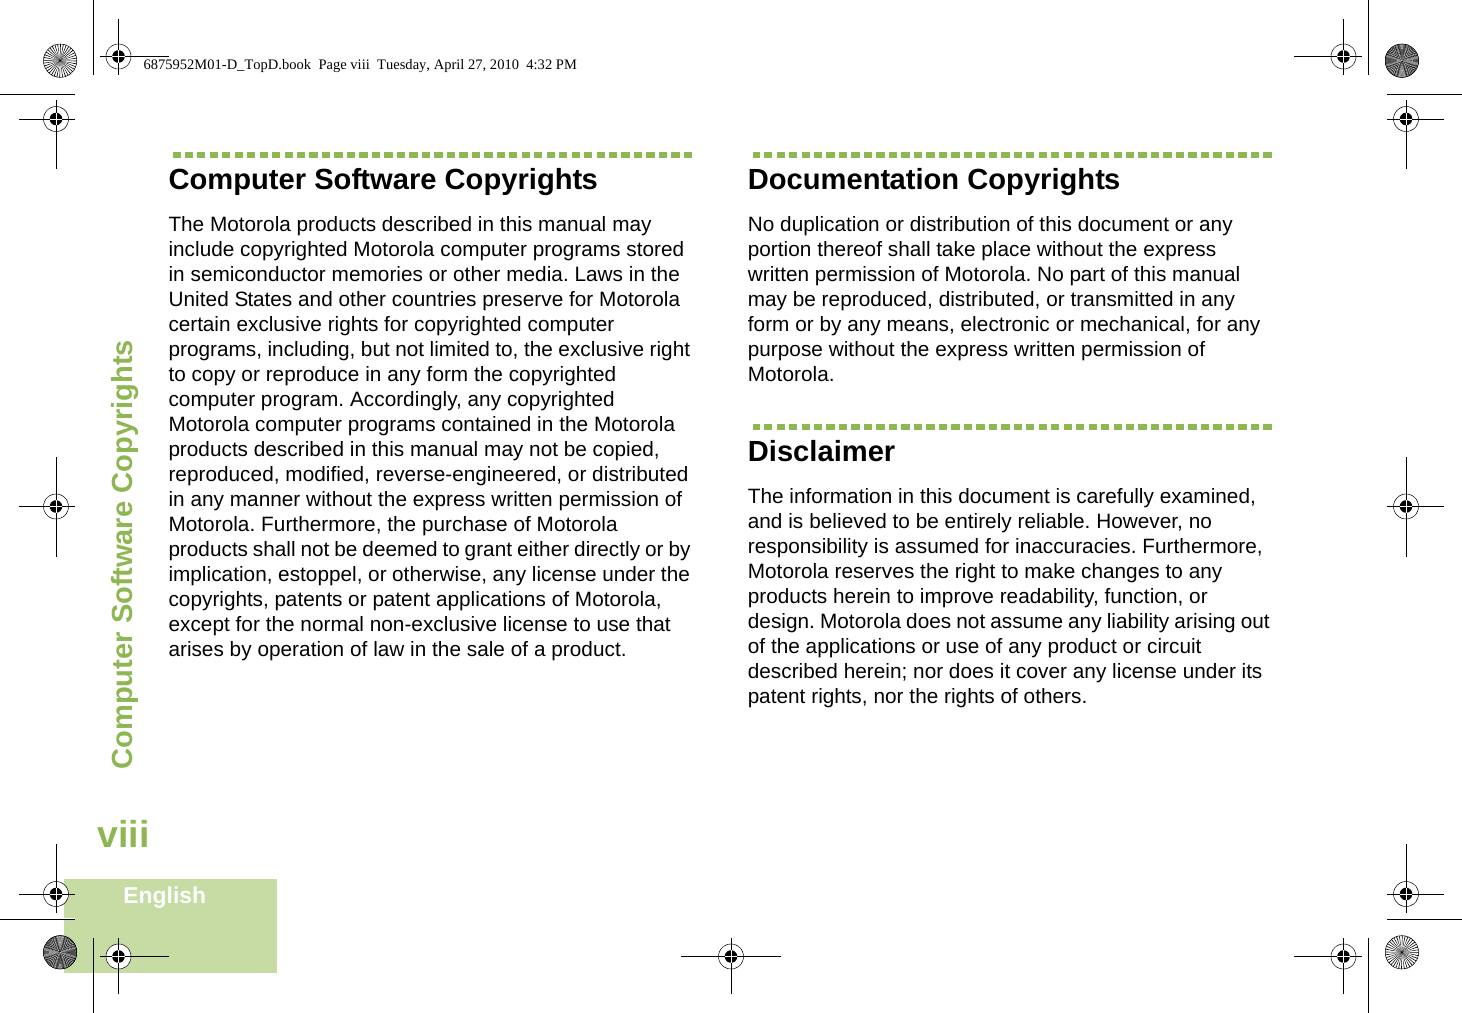 Computer Software CopyrightsEnglishviiiComputer Software CopyrightsThe Motorola products described in this manual may include copyrighted Motorola computer programs stored in semiconductor memories or other media. Laws in the United States and other countries preserve for Motorola certain exclusive rights for copyrighted computer programs, including, but not limited to, the exclusive right to copy or reproduce in any form the copyrighted computer program. Accordingly, any copyrighted Motorola computer programs contained in the Motorola products described in this manual may not be copied, reproduced, modified, reverse-engineered, or distributed in any manner without the express written permission of Motorola. Furthermore, the purchase of Motorola products shall not be deemed to grant either directly or by implication, estoppel, or otherwise, any license under the copyrights, patents or patent applications of Motorola, except for the normal non-exclusive license to use that arises by operation of law in the sale of a product.Documentation CopyrightsNo duplication or distribution of this document or any portion thereof shall take place without the express written permission of Motorola. No part of this manual may be reproduced, distributed, or transmitted in any form or by any means, electronic or mechanical, for any purpose without the express written permission of Motorola.DisclaimerThe information in this document is carefully examined, and is believed to be entirely reliable. However, no responsibility is assumed for inaccuracies. Furthermore, Motorola reserves the right to make changes to any products herein to improve readability, function, or design. Motorola does not assume any liability arising out of the applications or use of any product or circuit described herein; nor does it cover any license under its patent rights, nor the rights of others. 6875952M01-D_TopD.book  Page viii  Tuesday, April 27, 2010  4:32 PM